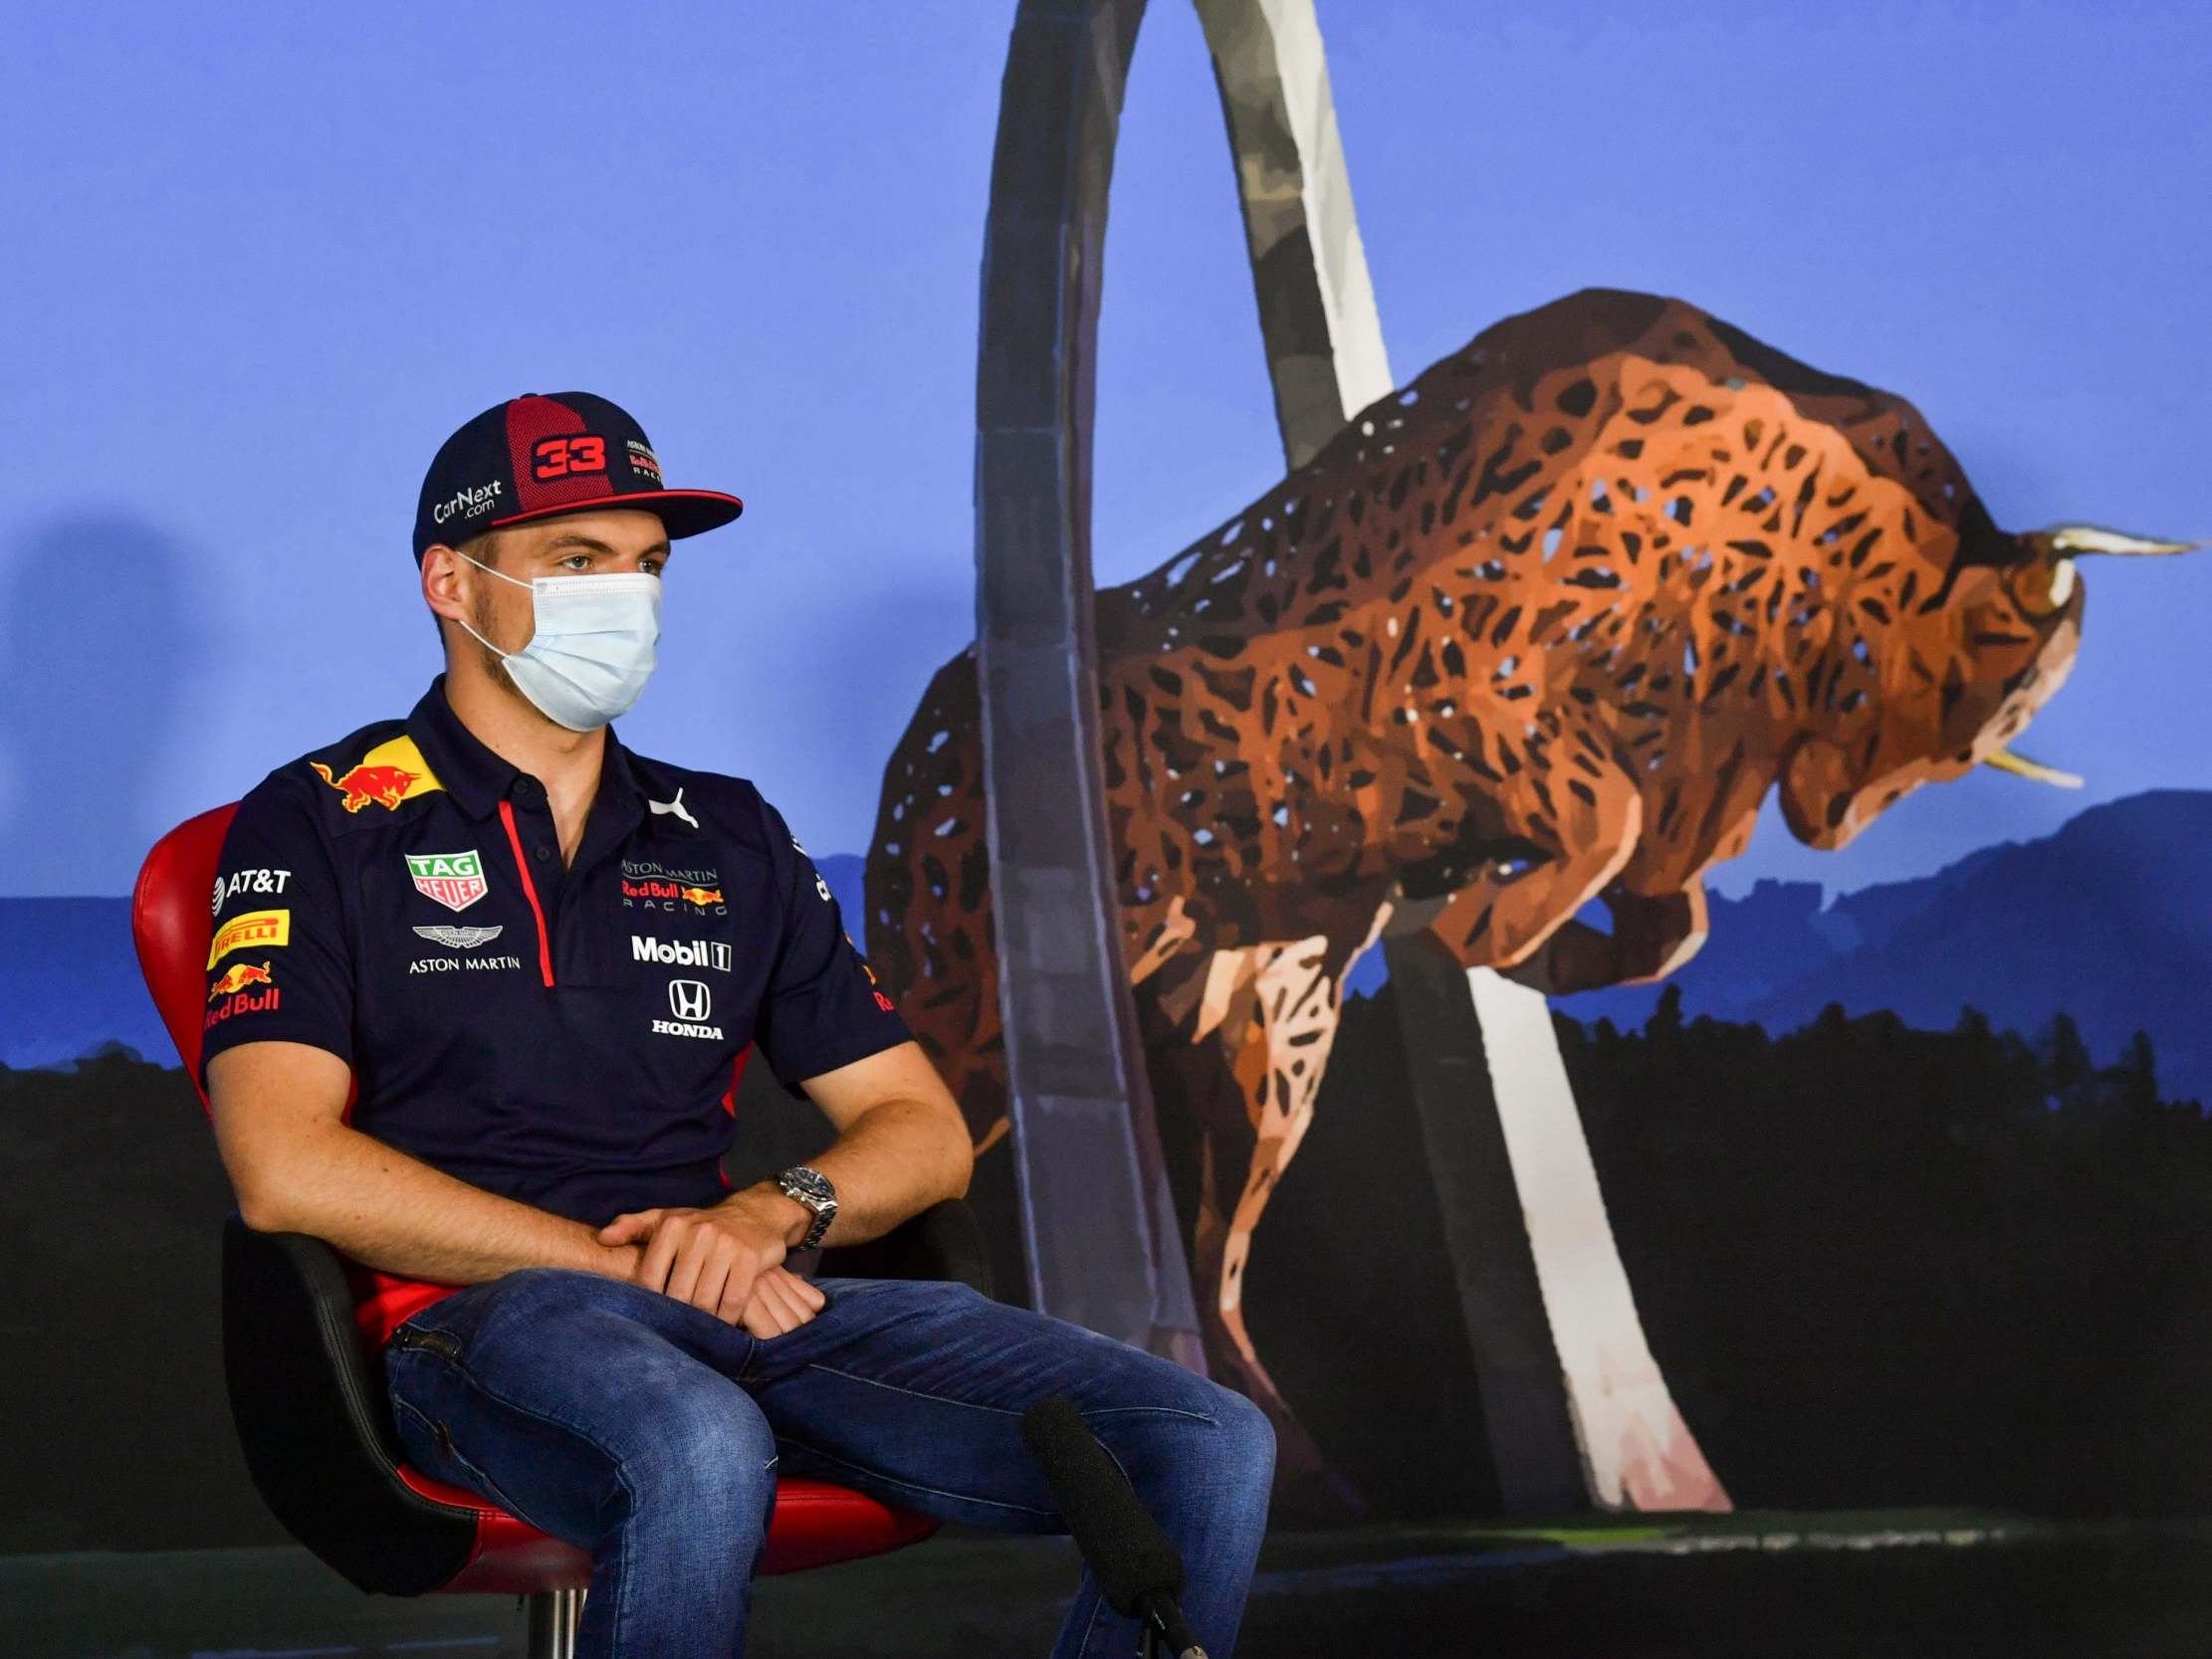 Max Verstappen and Red Bull are expected to provided the stiffest challenge to Mercedes